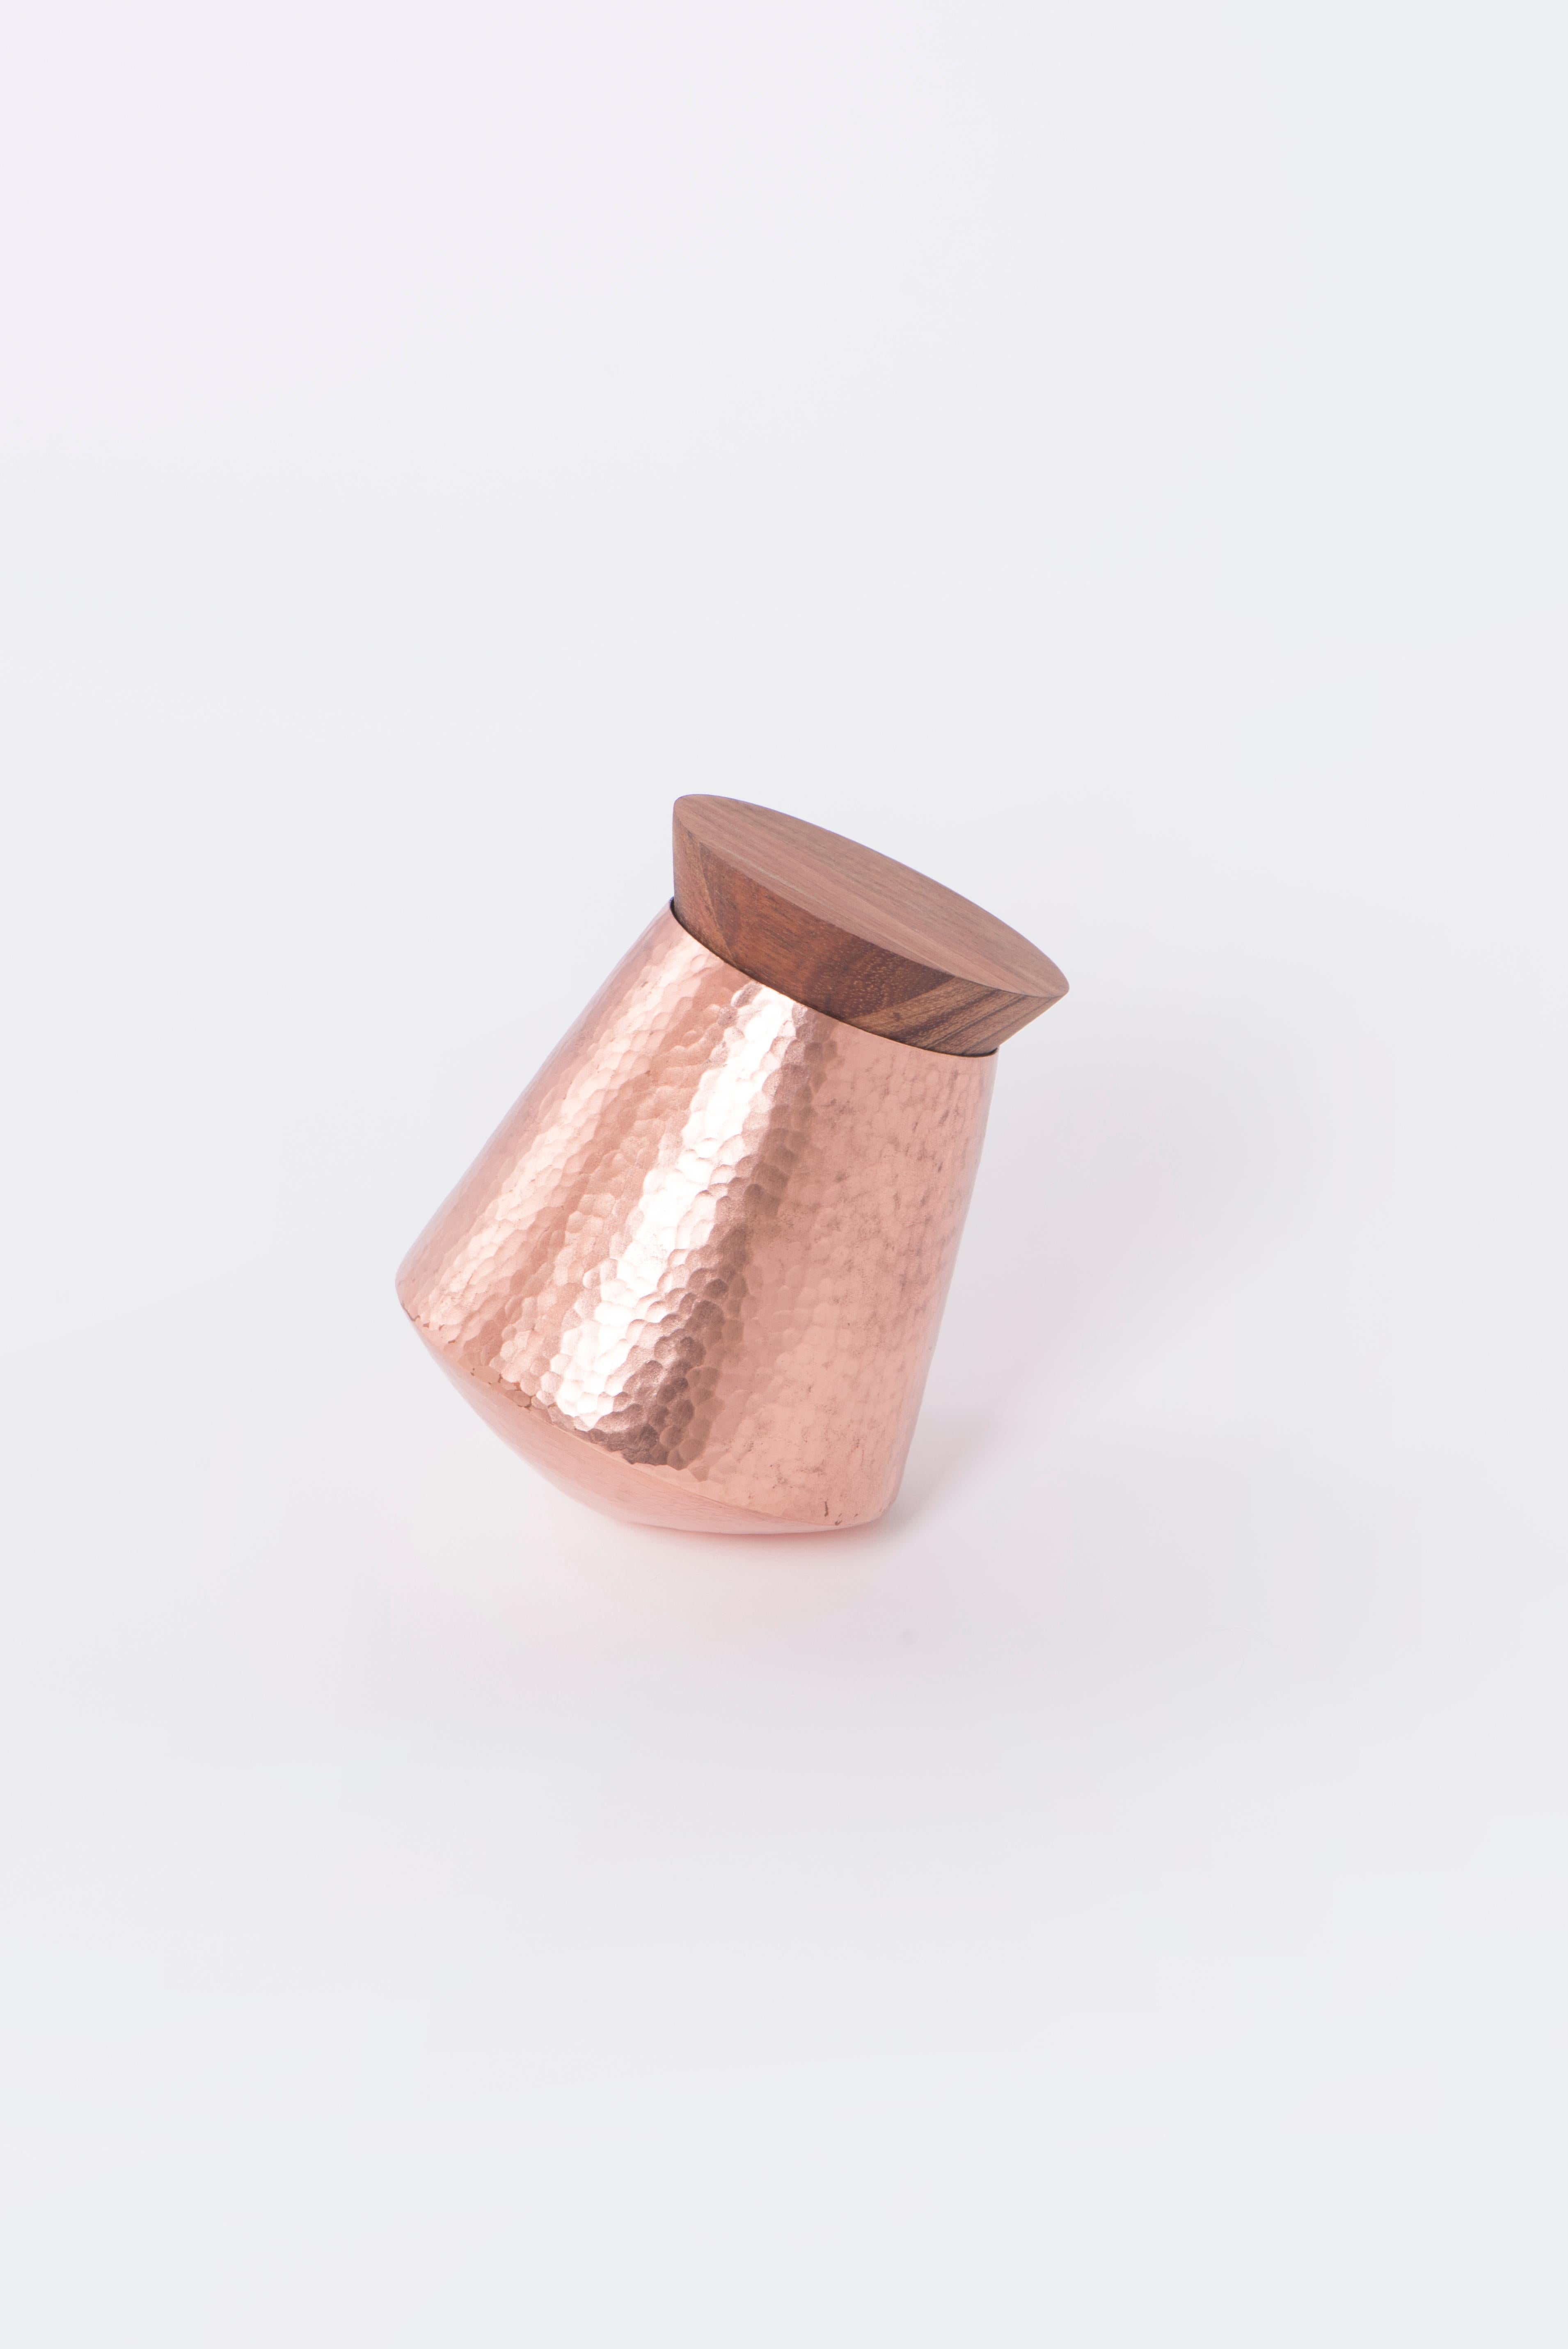 Balance between copper and wood. Flashes of light and movement come together to give life to the cointainers dancing to the sound of their own body and leaving a trace of their reflections.
The Vaivén containers are the ideal accessory to give